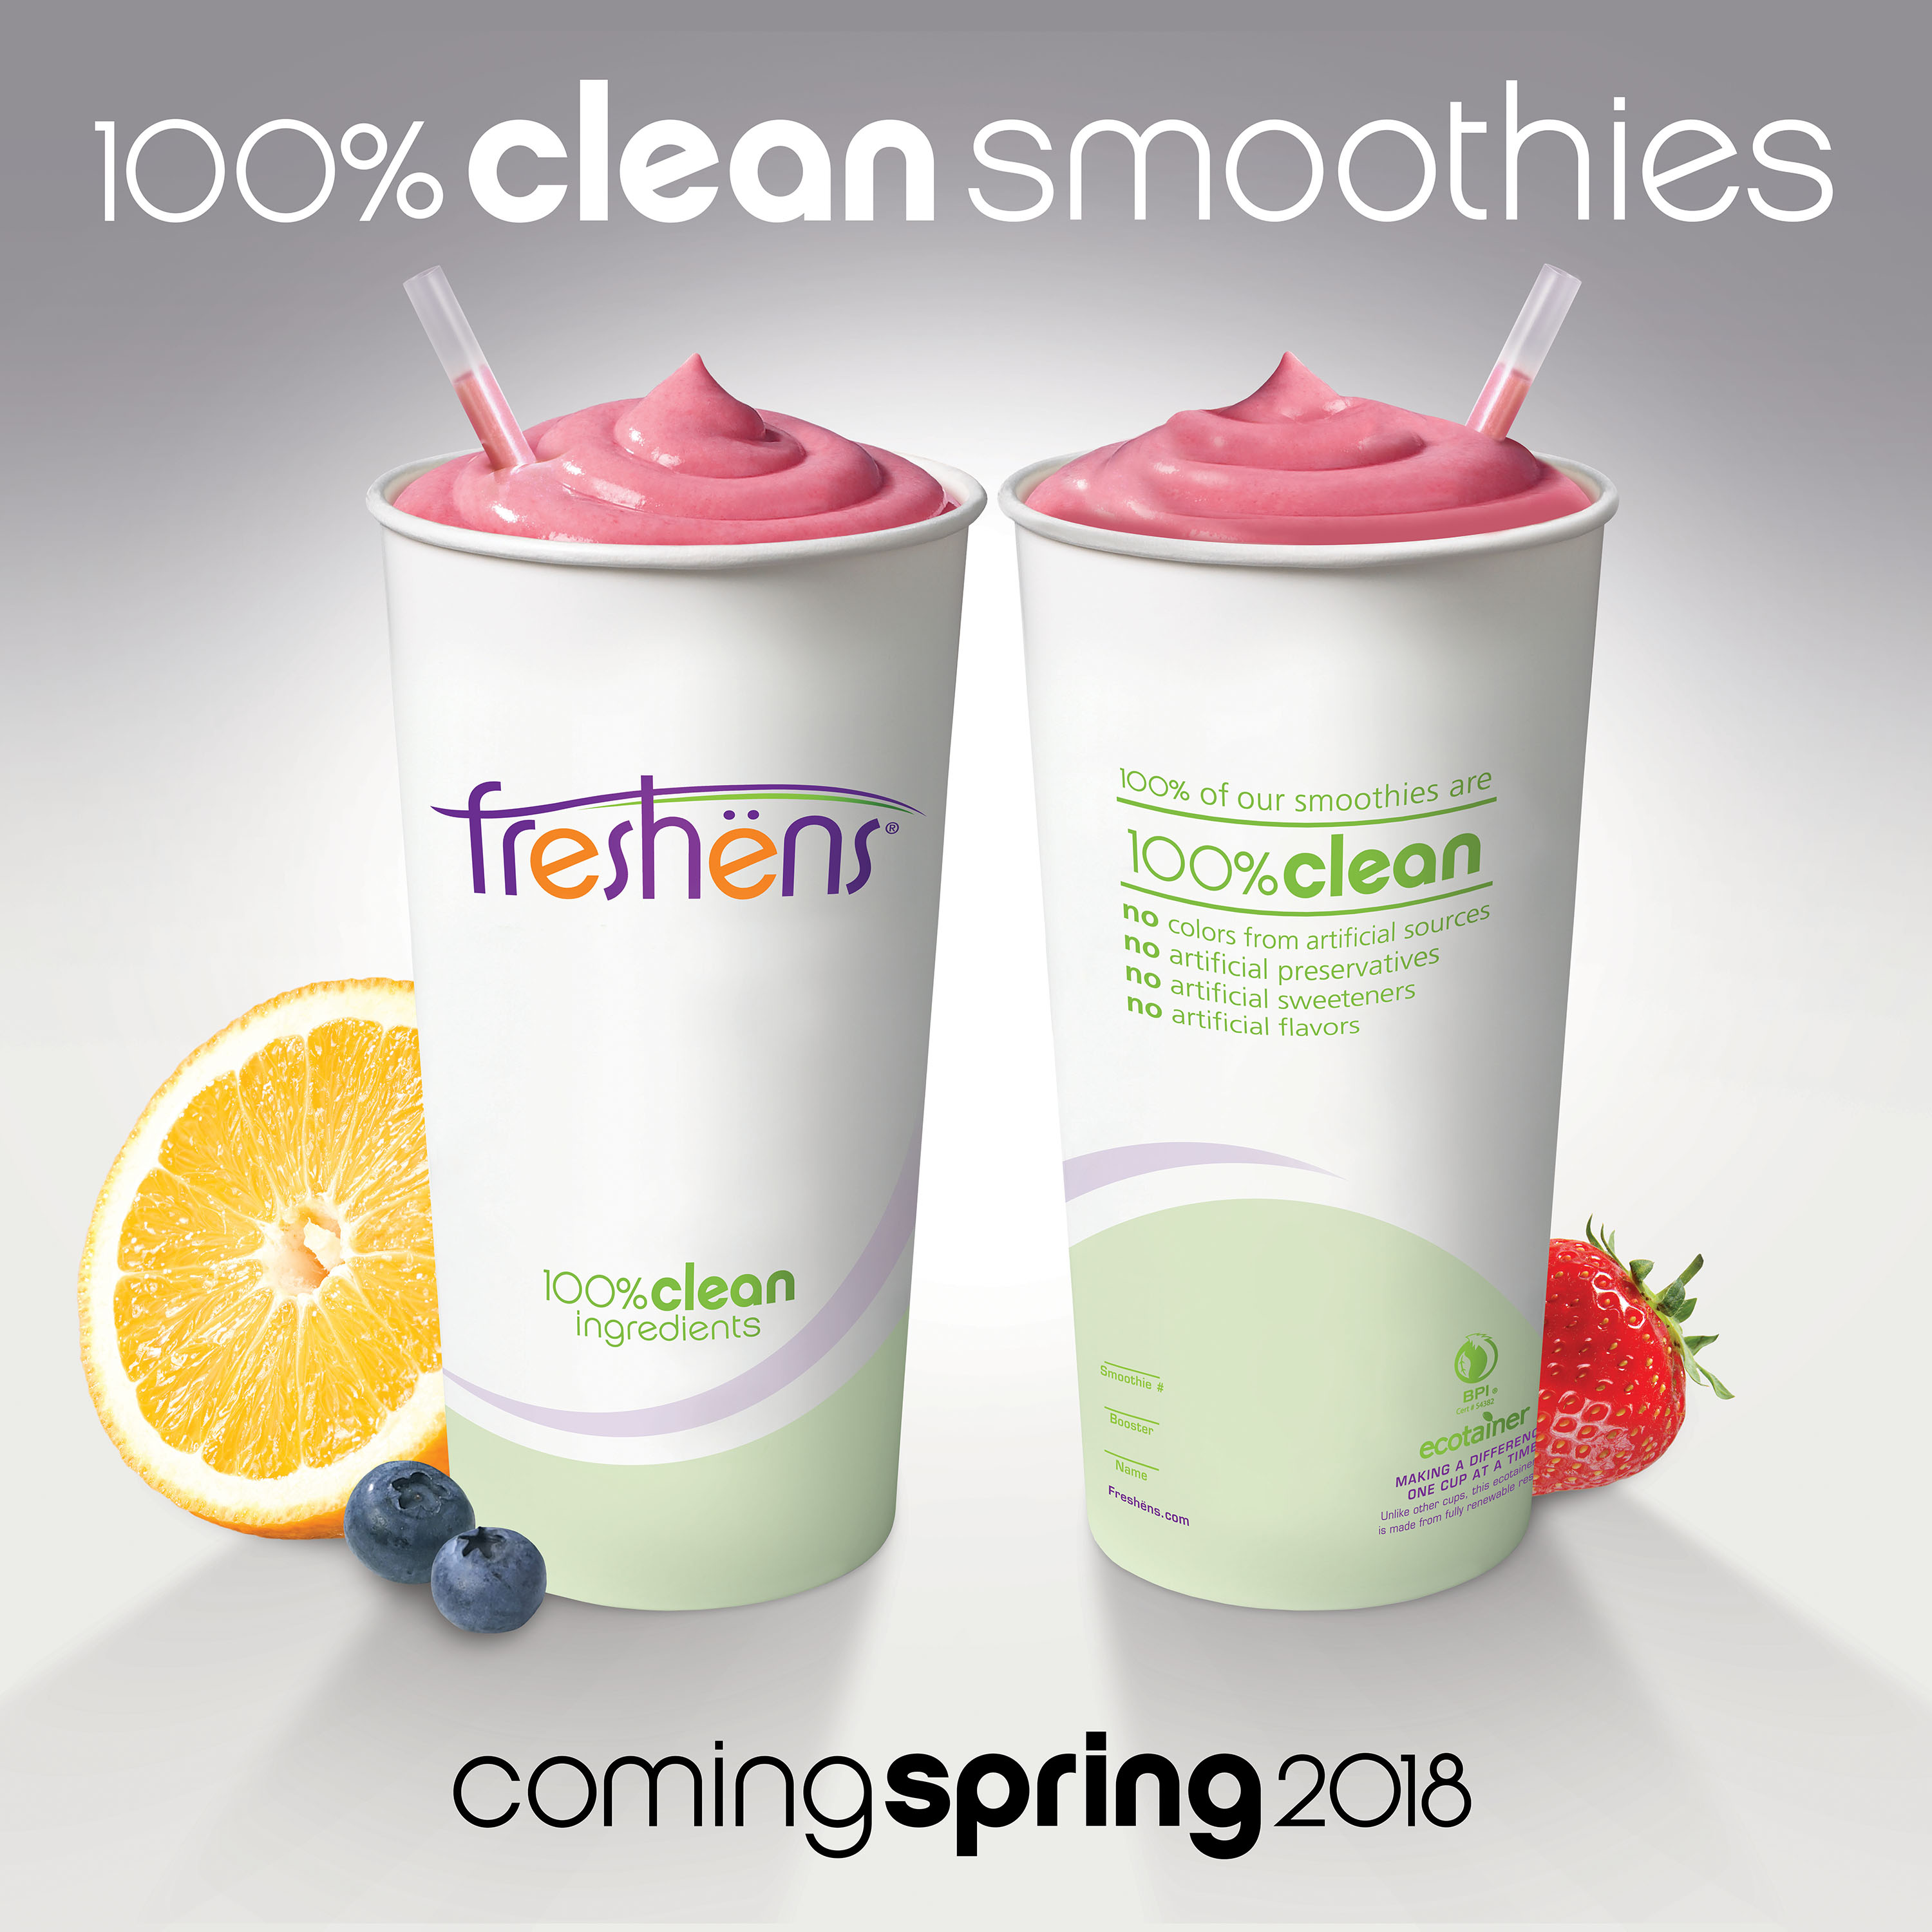 100% of Freshens Smoothies will be 100% Clean This Spring! No artificial preservatives, sweeteners, flavors, or colors from artificial sources. 100% Gluten Friendly, 100% Non-GMO Fruits & Vegetables, 100% Vegan Raw Sugar, 100% Free from Growth Hormones